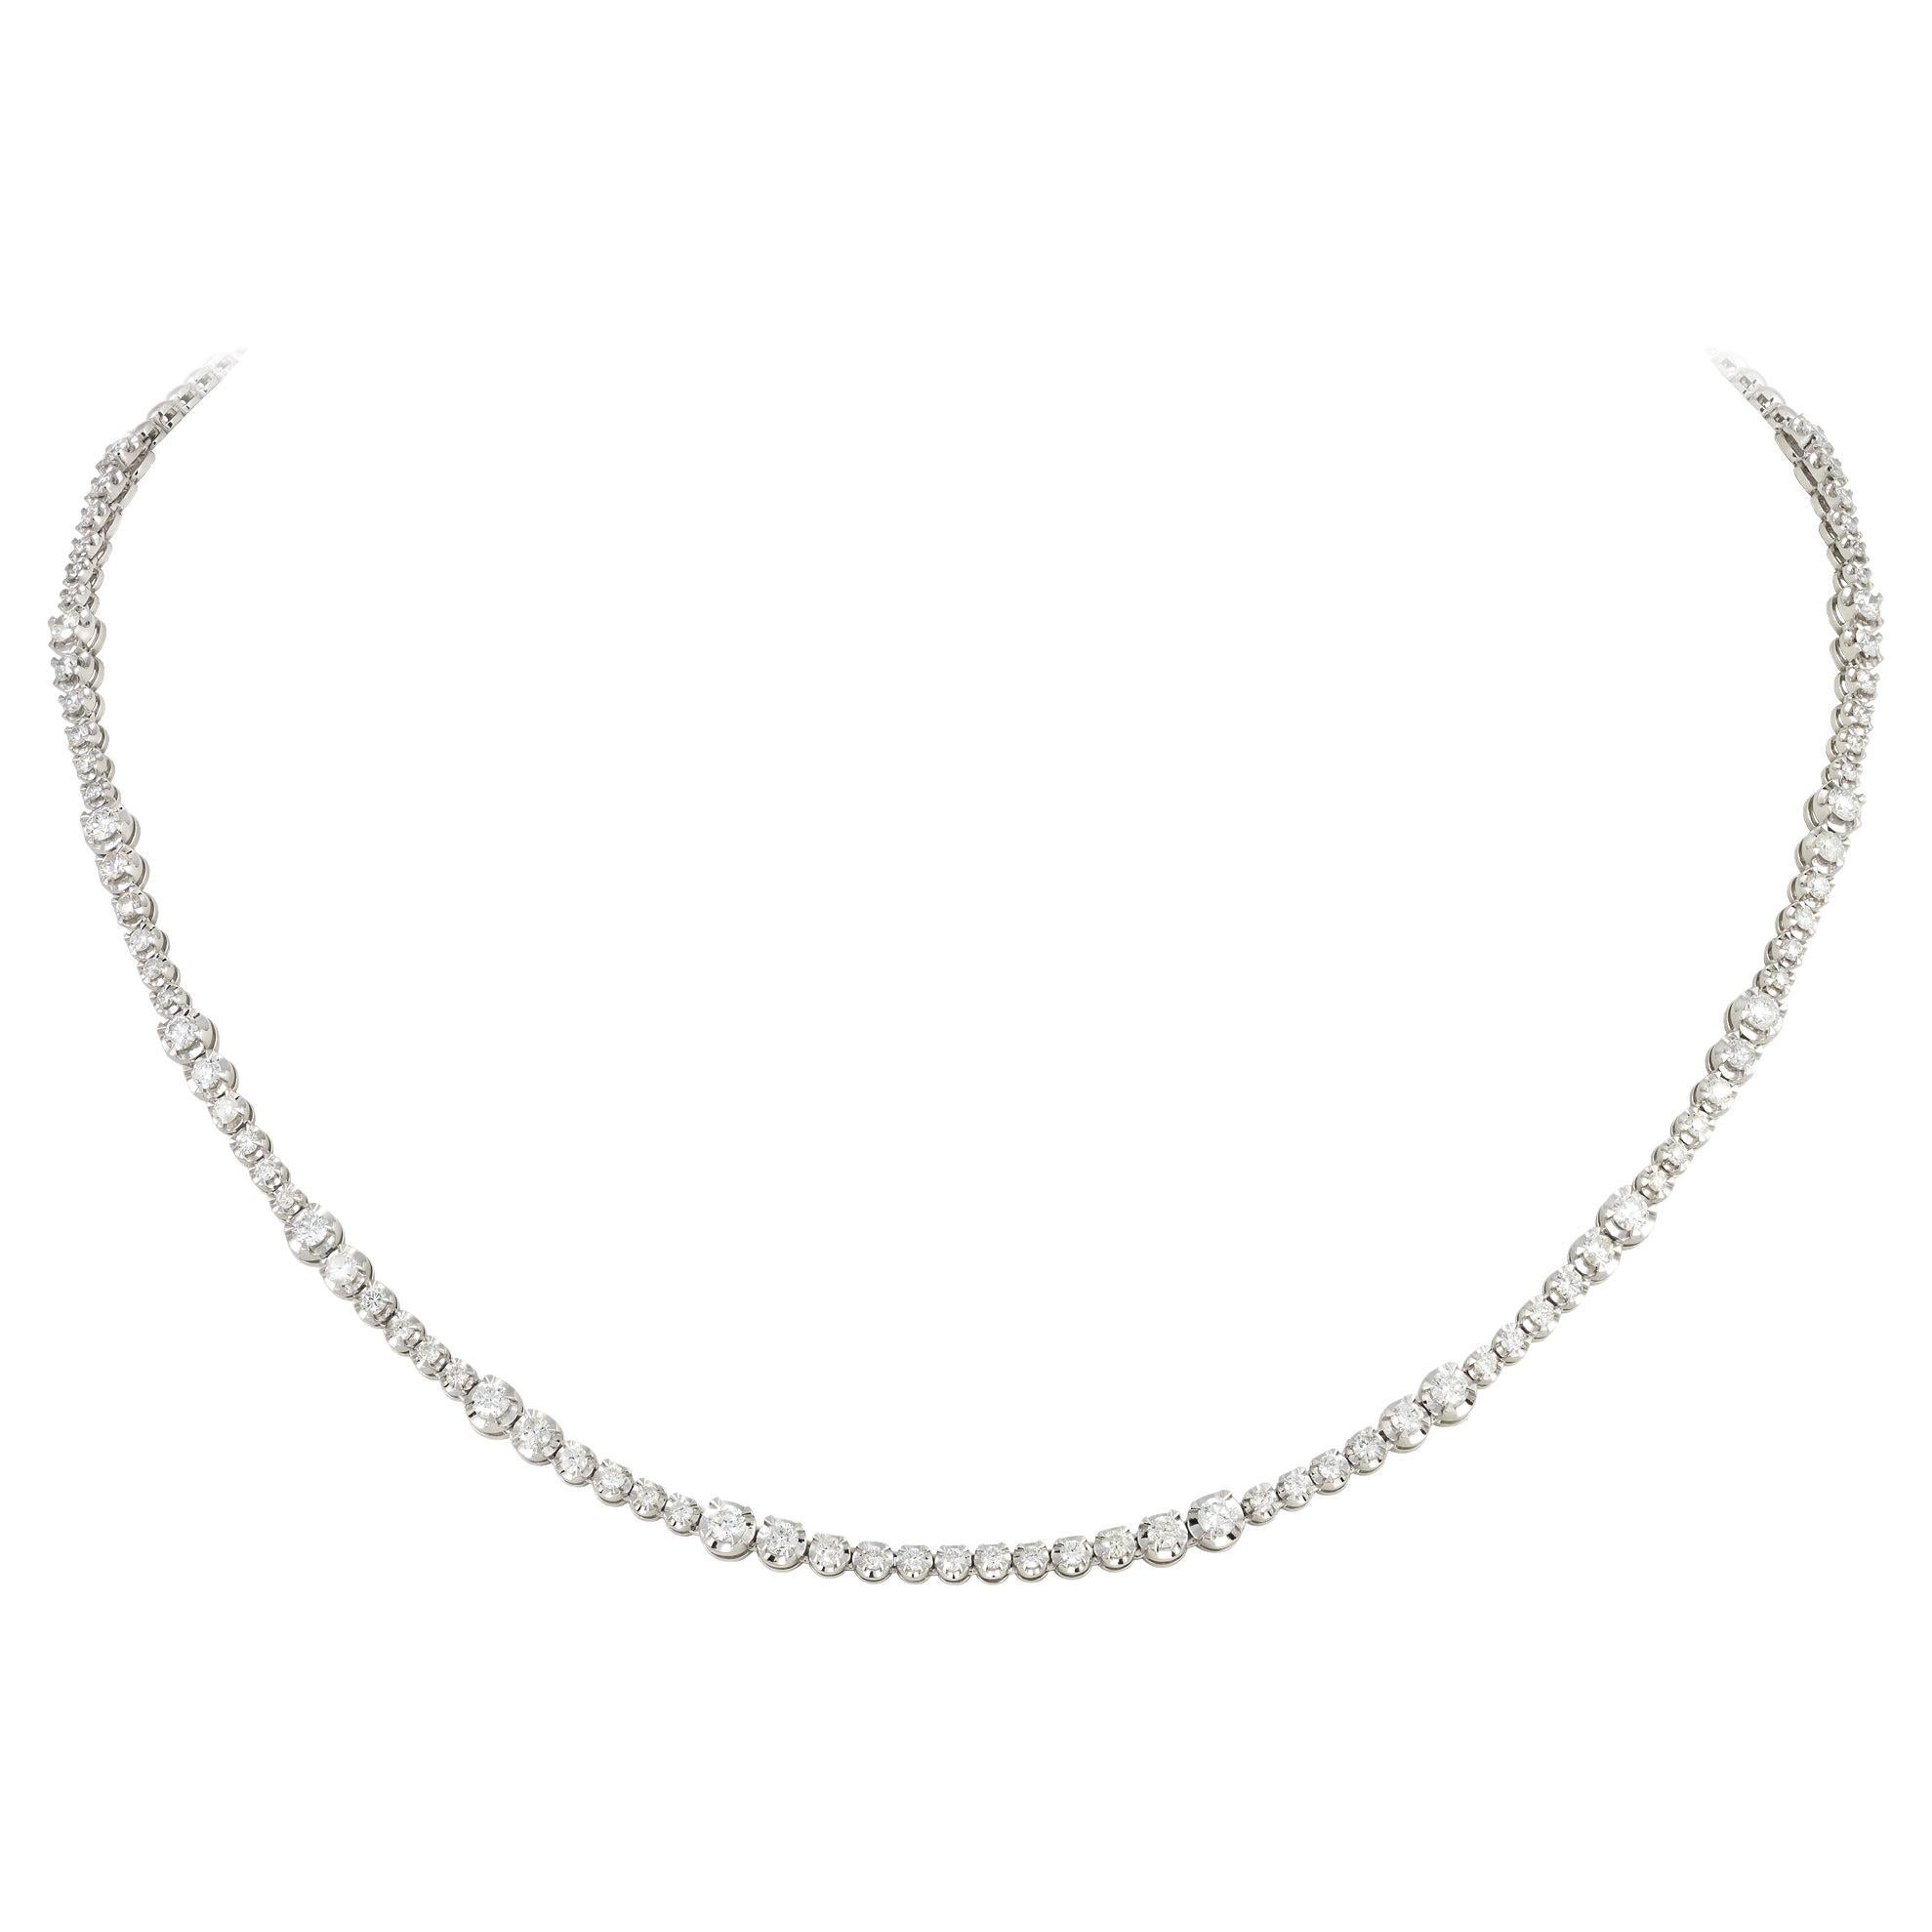 Evening White Gold 18K Necklace Diamond for Her